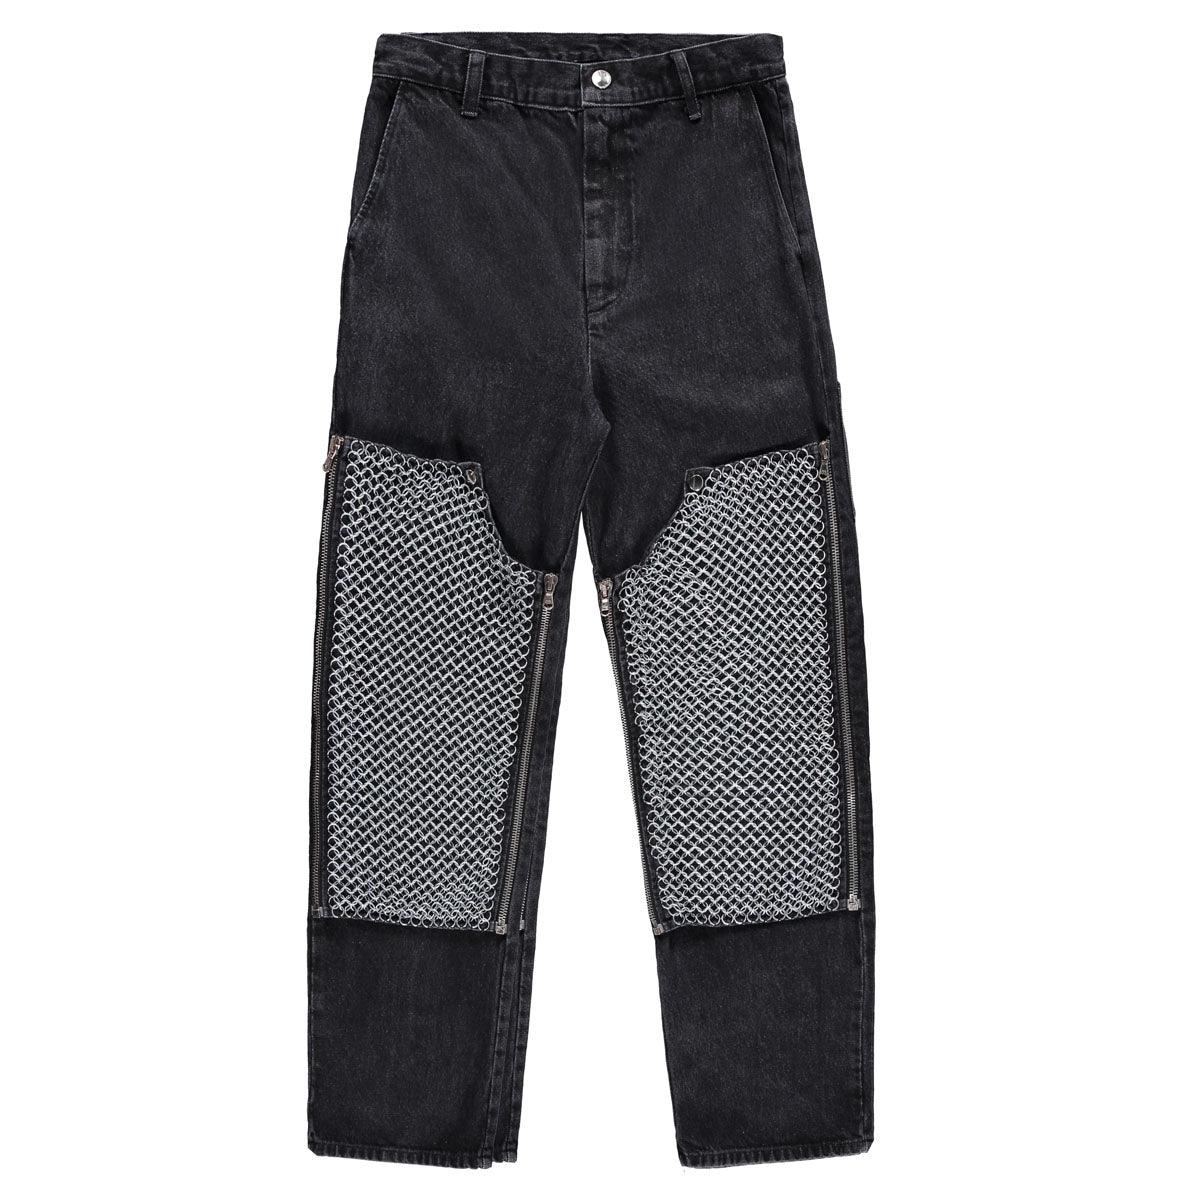 ARMORED DOUBLE PANEL PANTS - Strike Oil